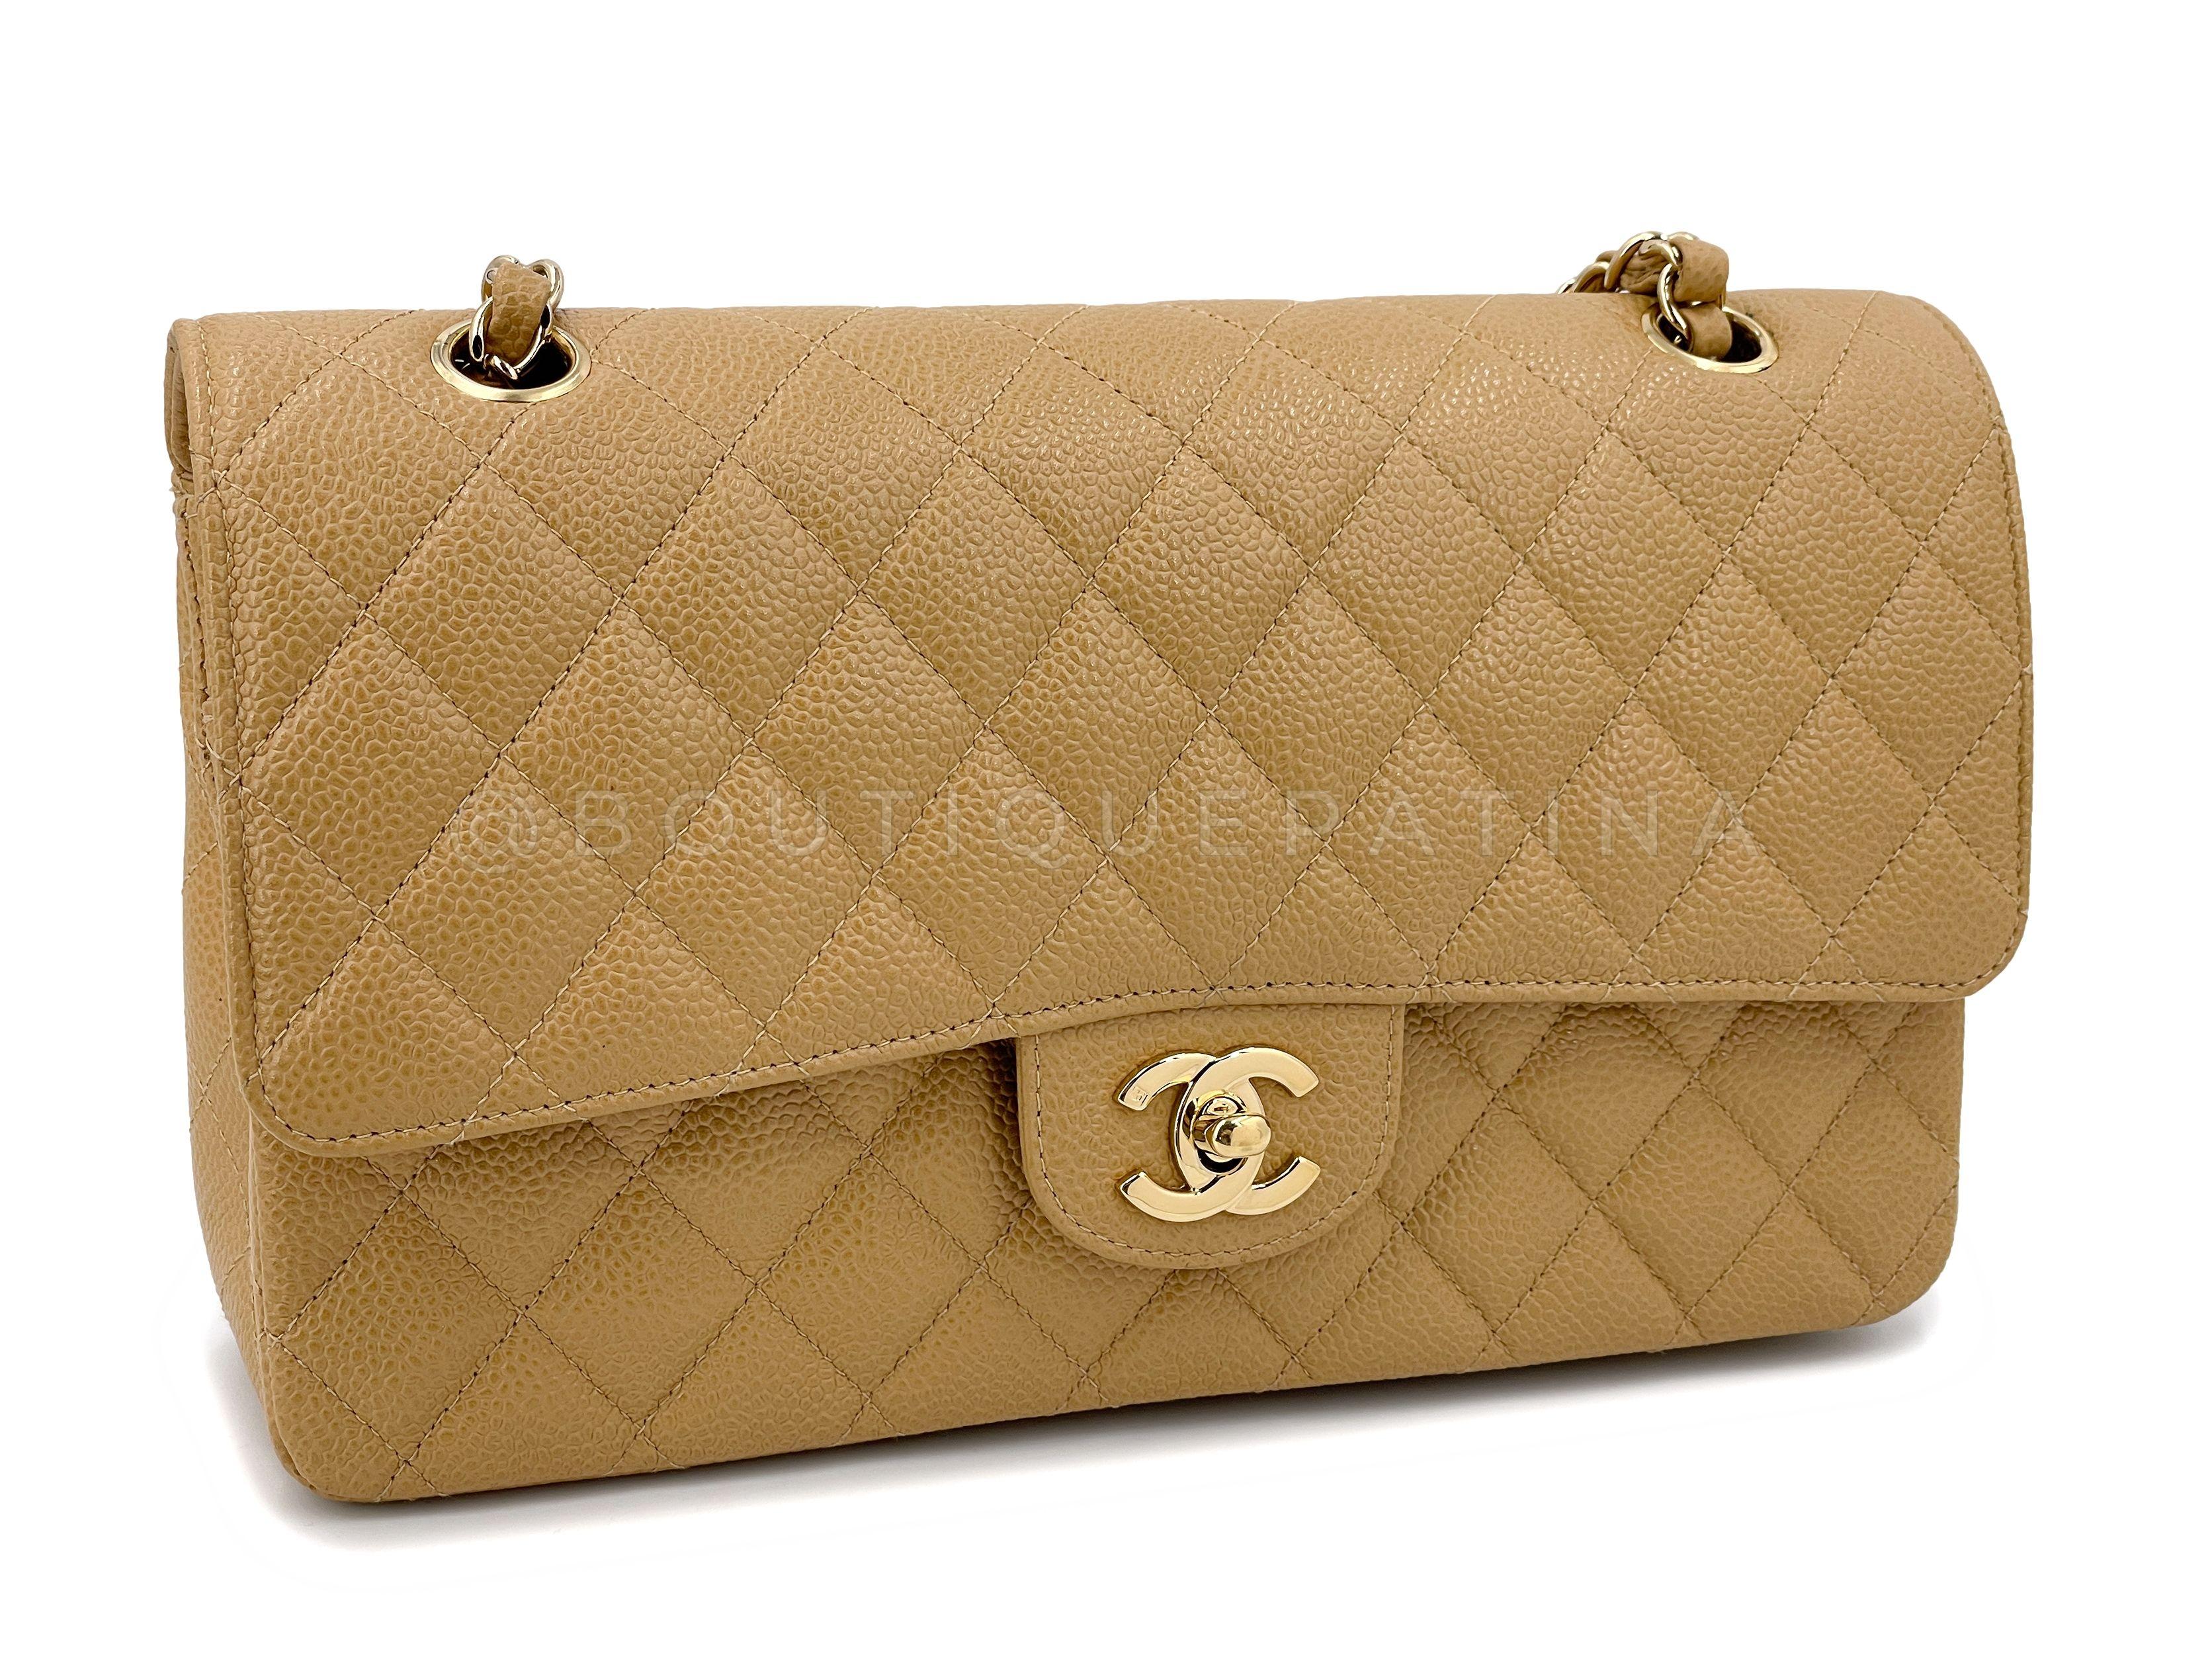 Chanel 02A Vintage Beige Caviar Medium Classic Double Flap Bag 24k GHW 64907 In Excellent Condition For Sale In Costa Mesa, CA